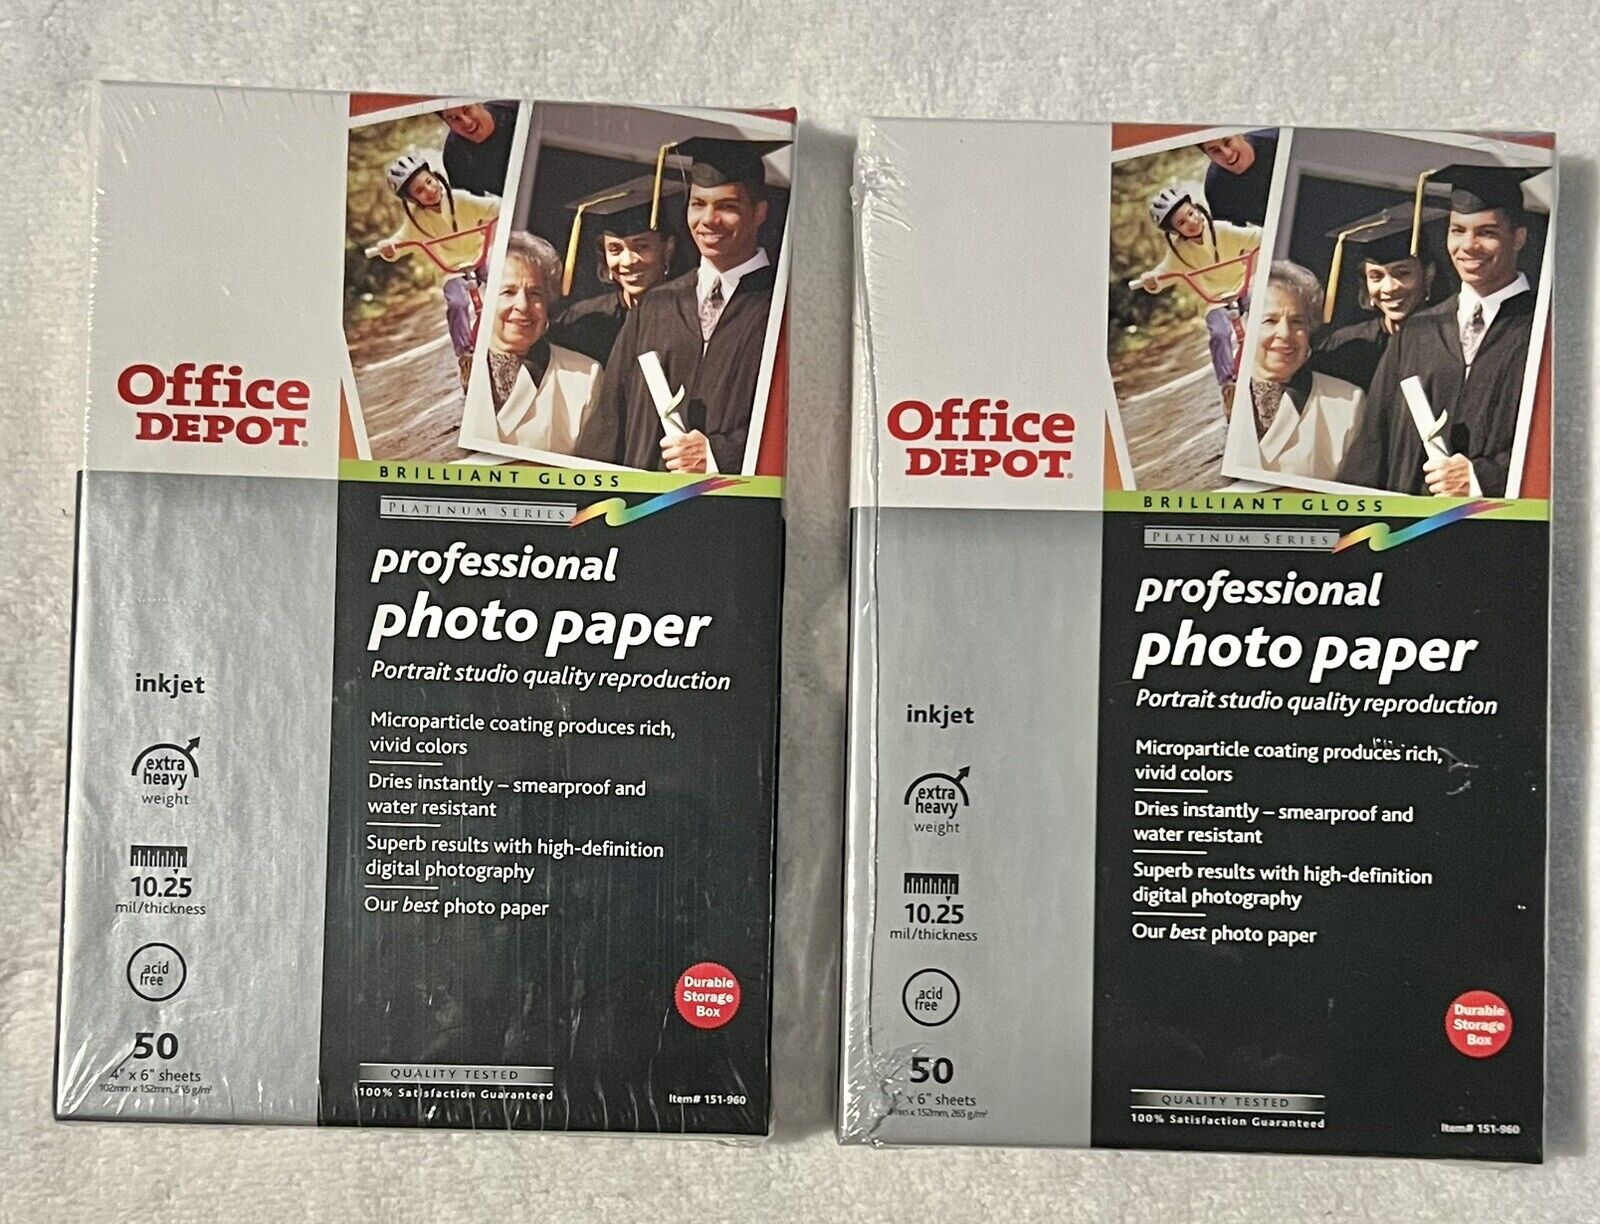 Office Depot Professional Photo Paper 50 Sheets 4x6 Brilliant Gloss Lot Of 2 New